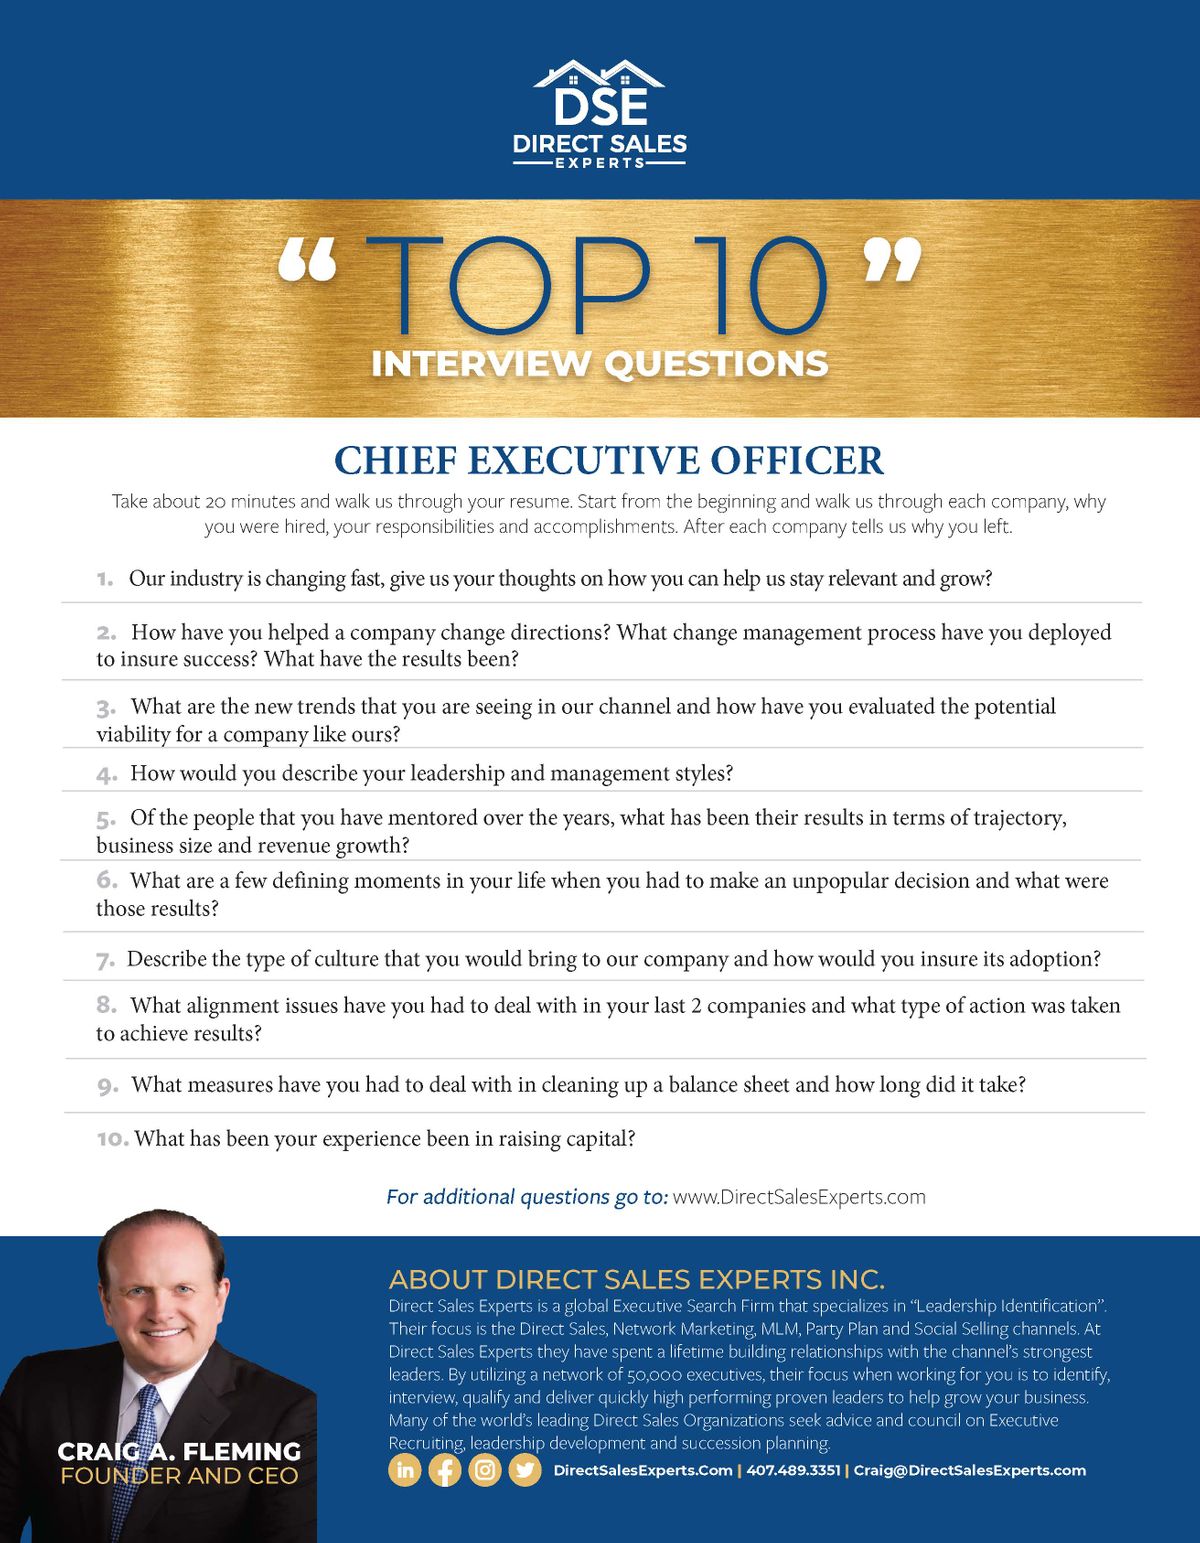 DirectSalesExperts_Top10-CEO-pdf_Page_1 (1).jpg